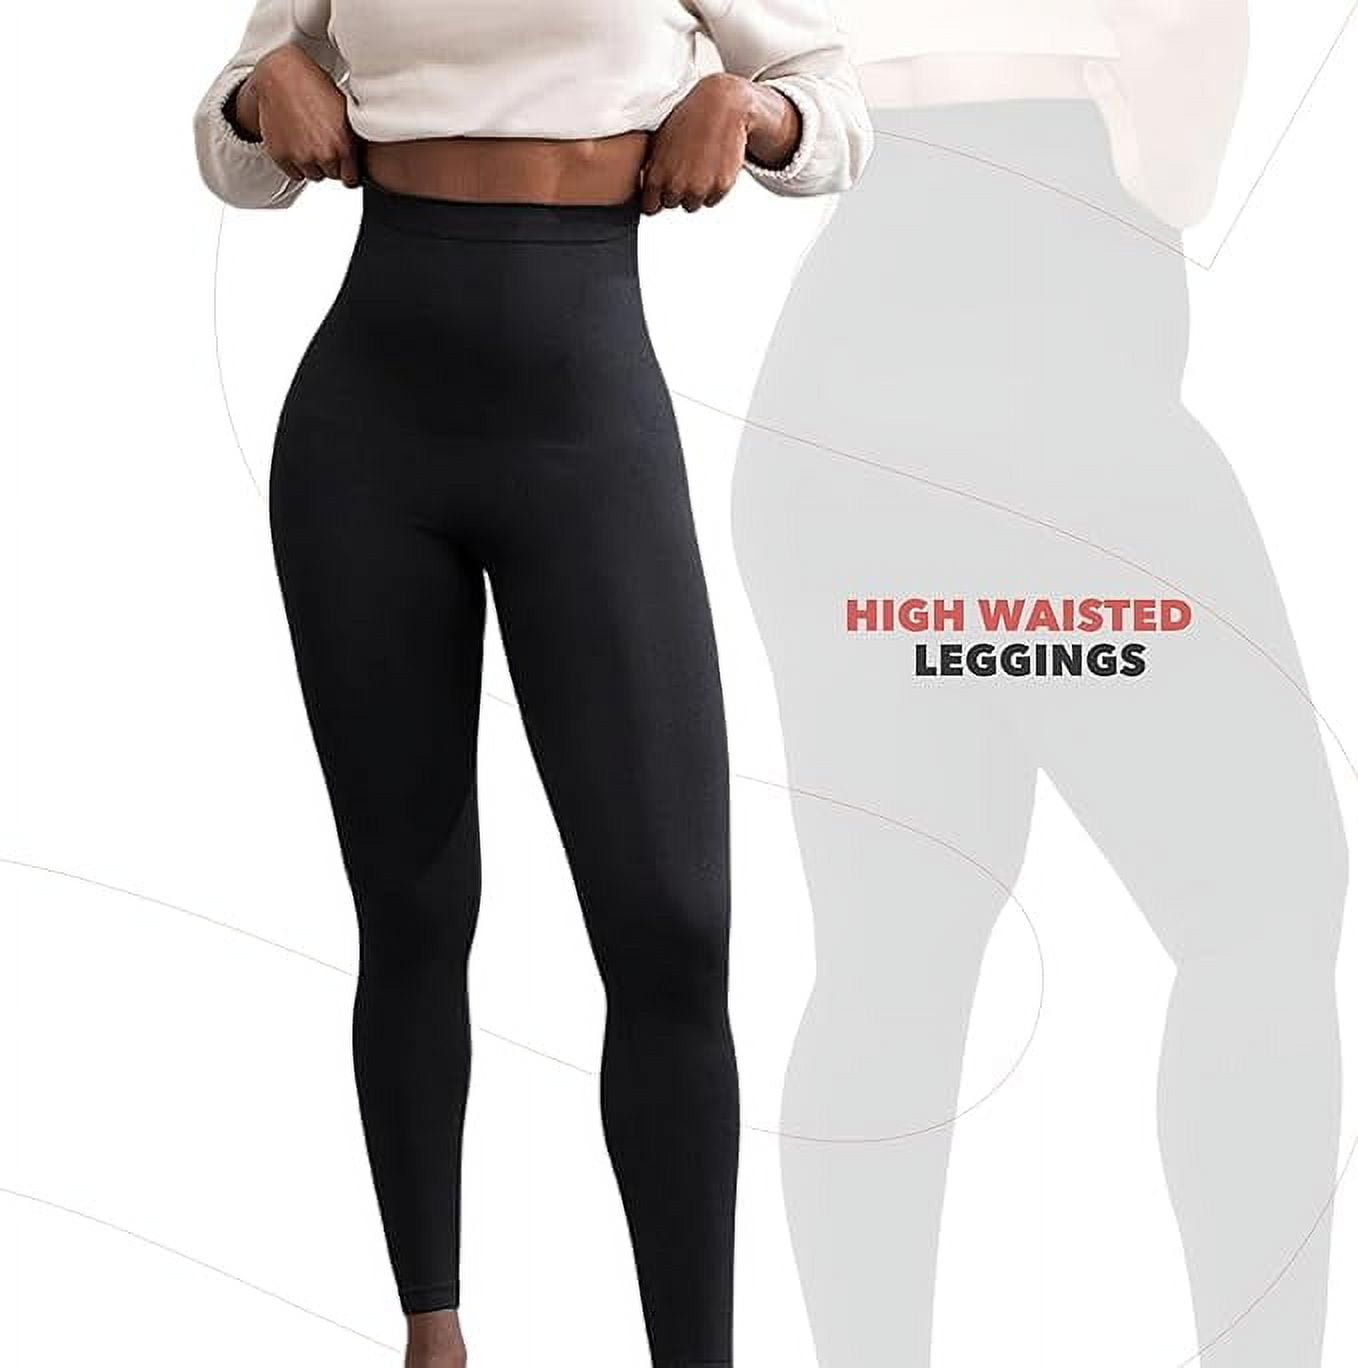 Ladies our new Compressing Shaper leggings are a game changer ❤️ A mix  between shapewear and activewear the unique clip design acts